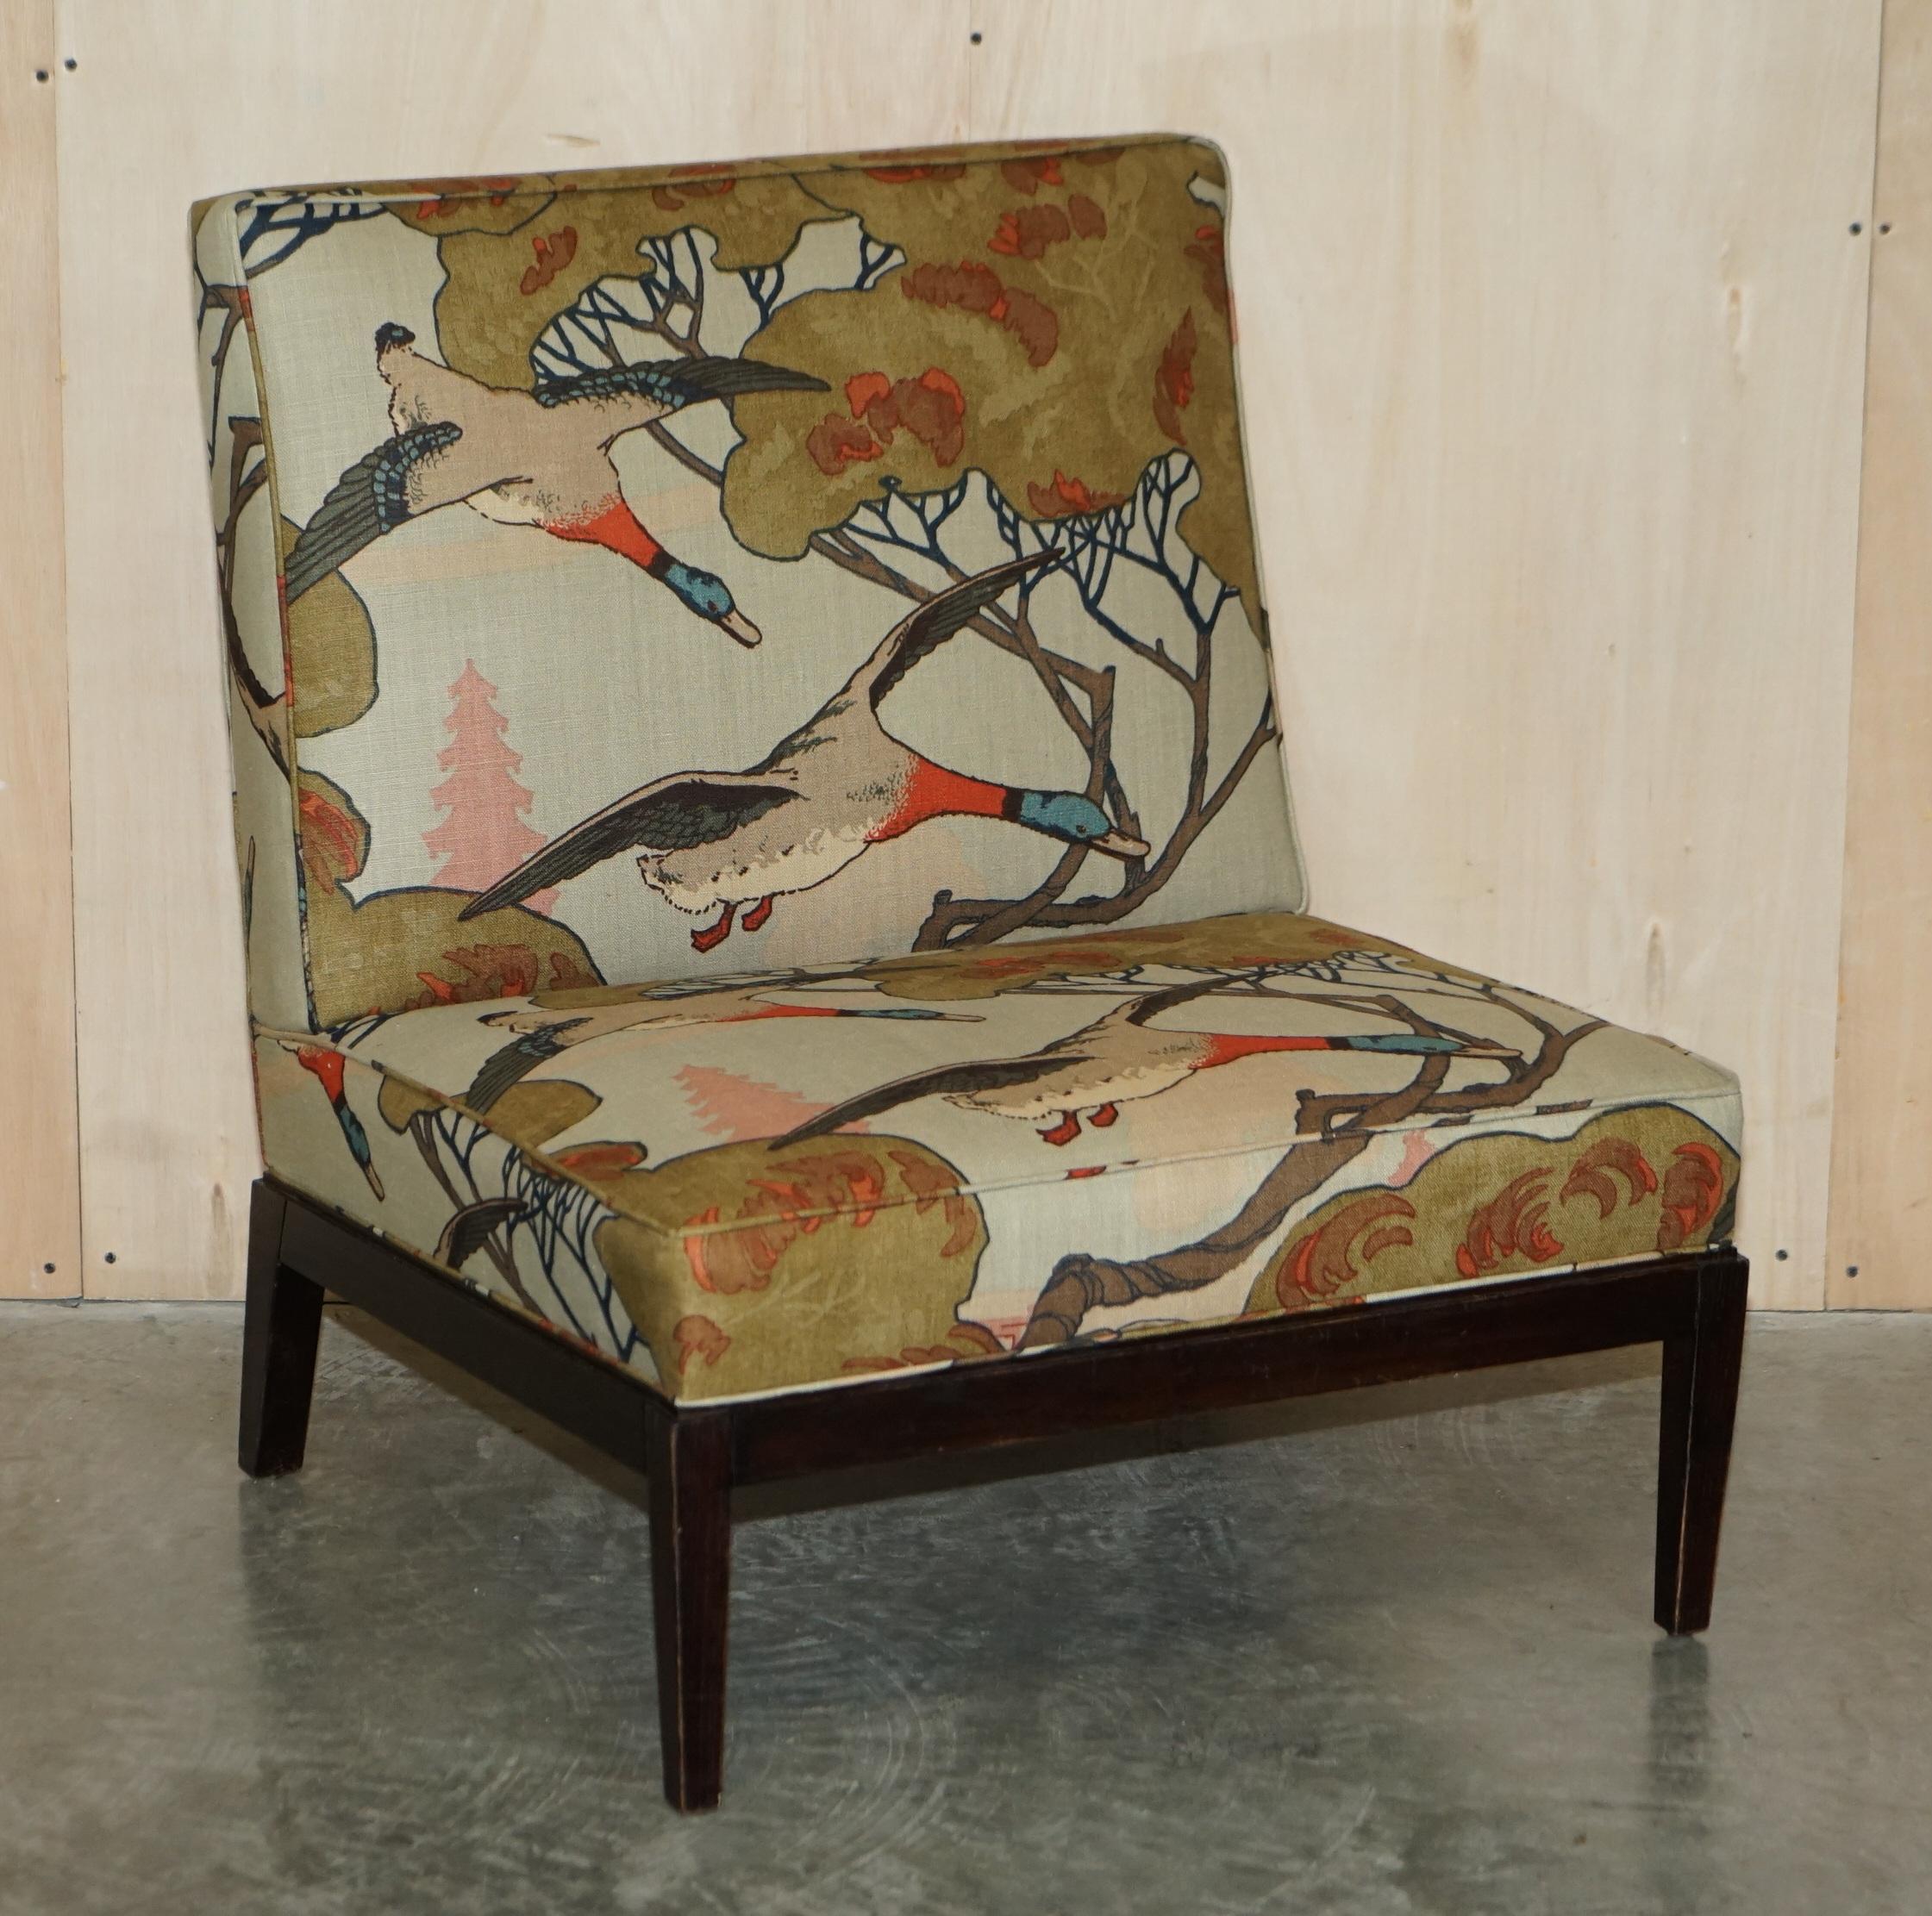 New Pair of George Smith Norris Armchairs in Mulberry Flying Ducks Upholstery For Sale 7